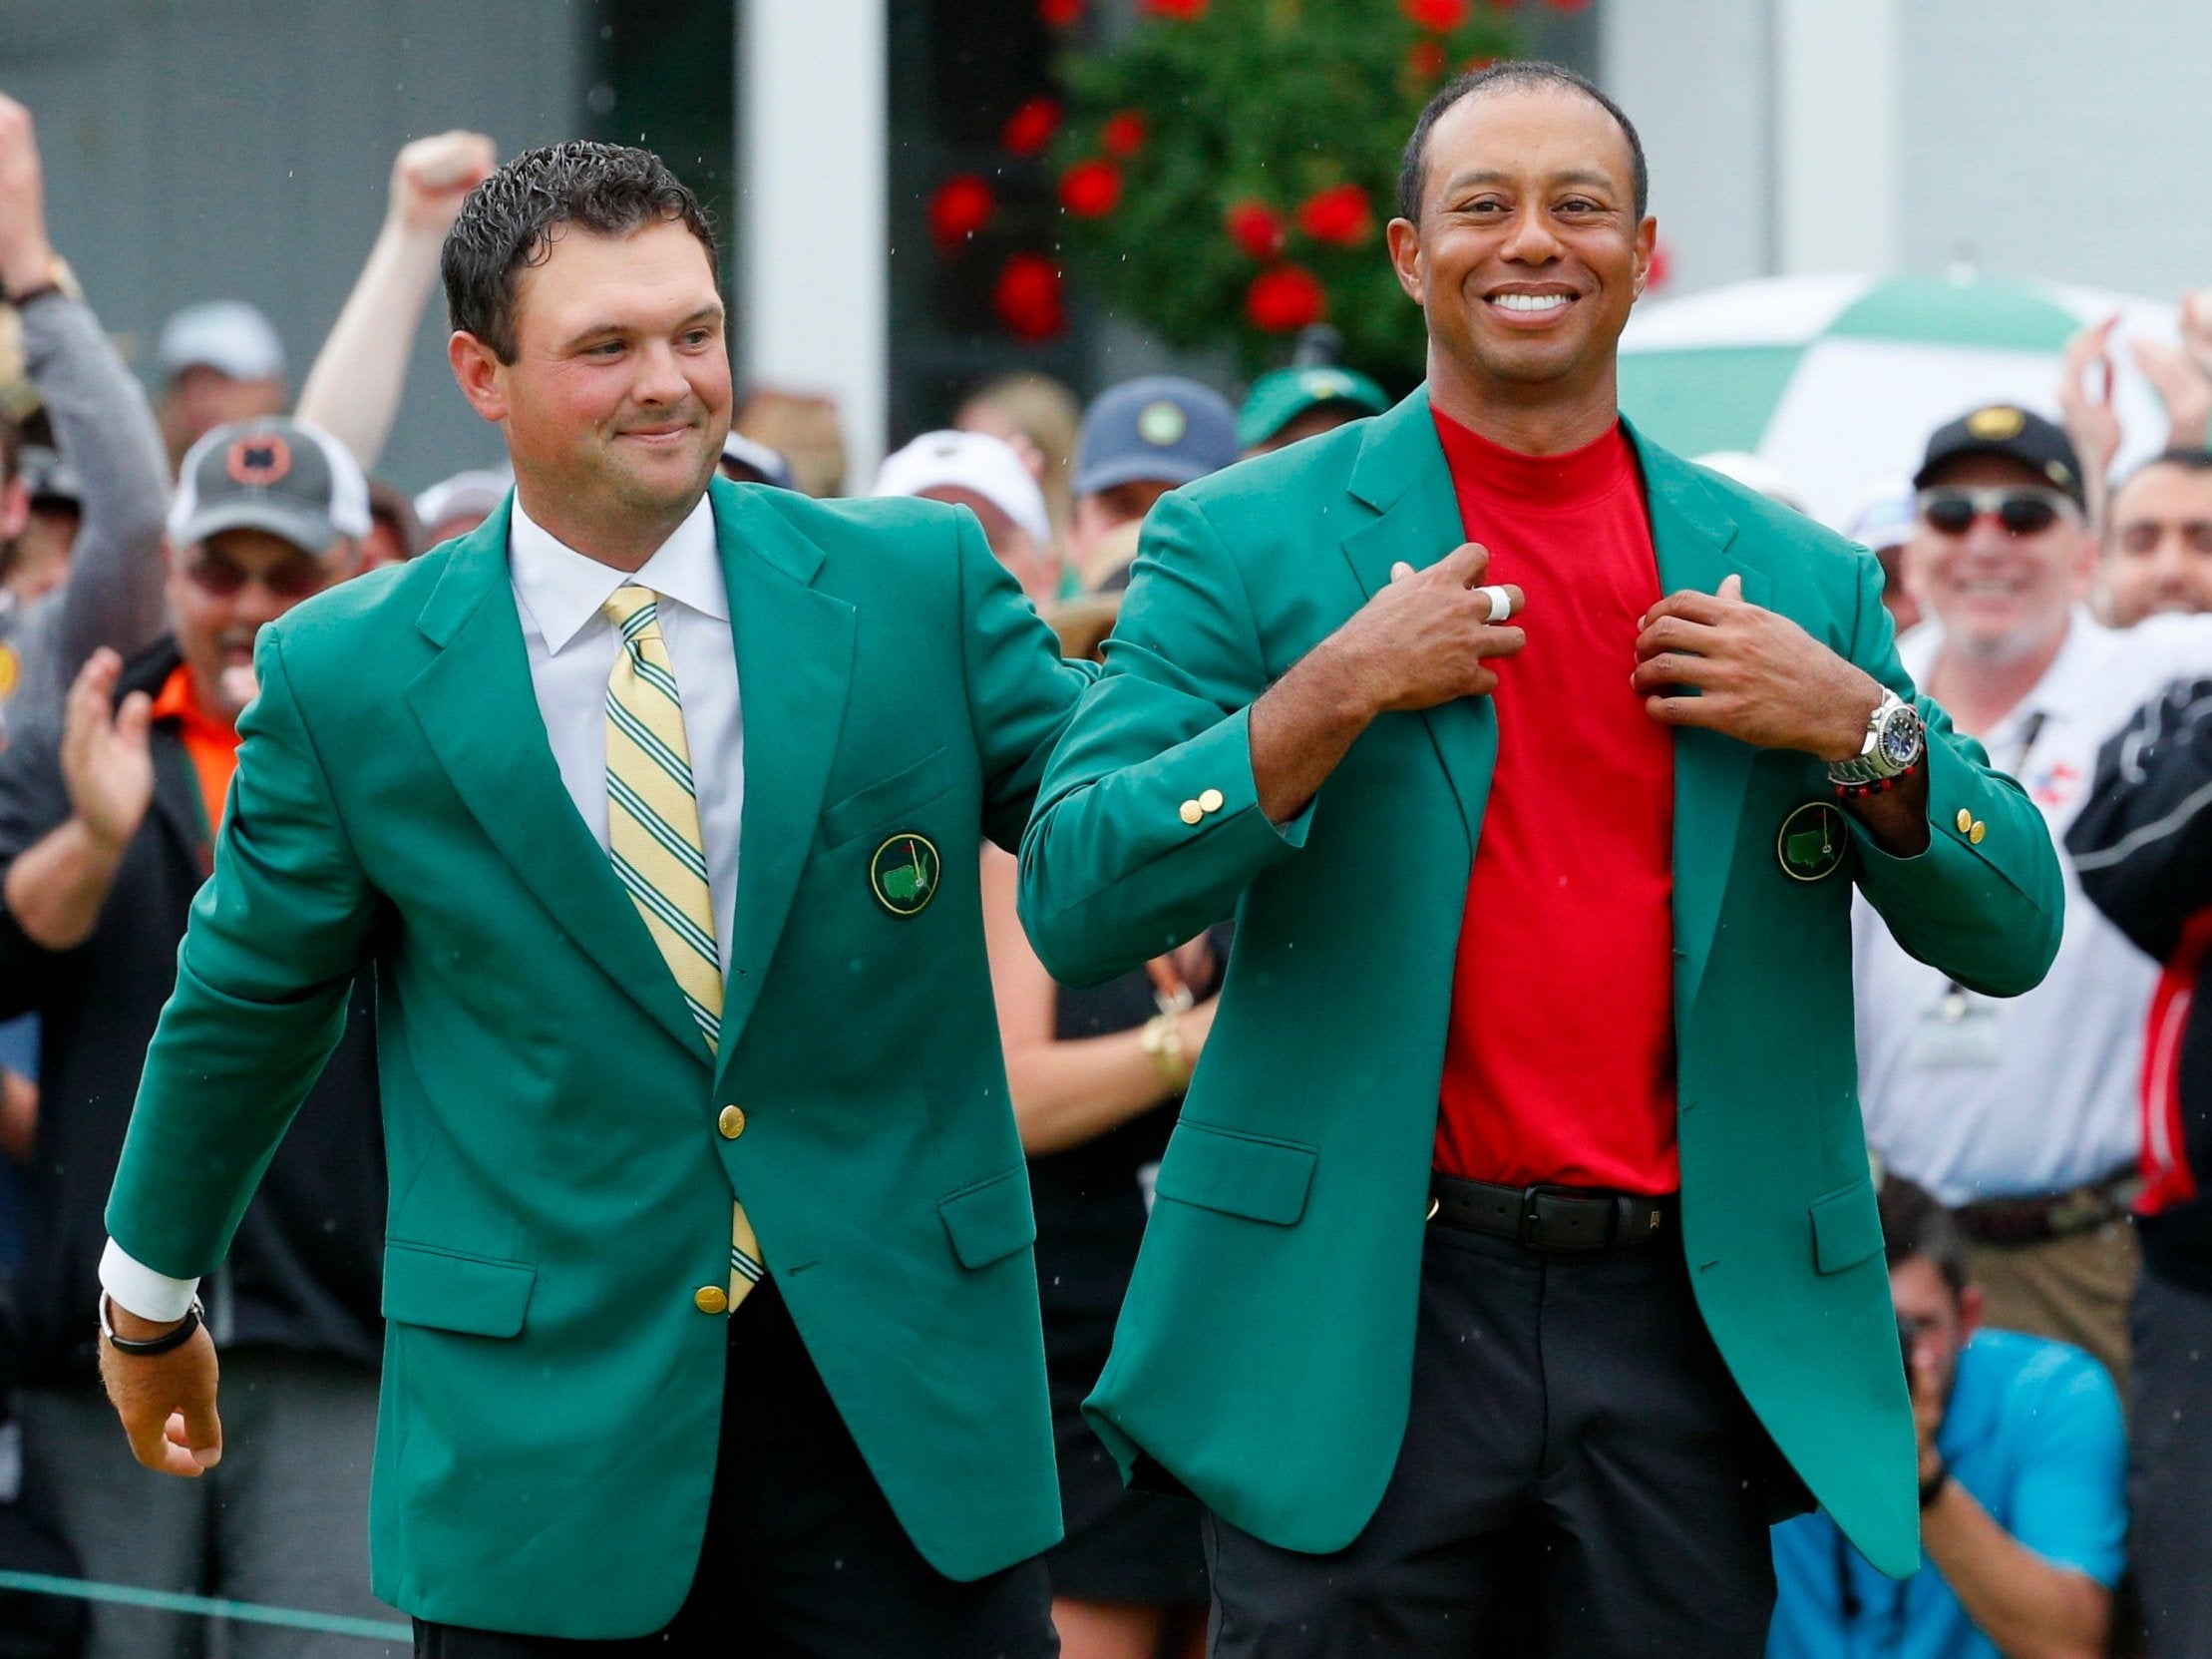 Woods' comeback to win The Masters is among the greatest sporting returns ever witnessed